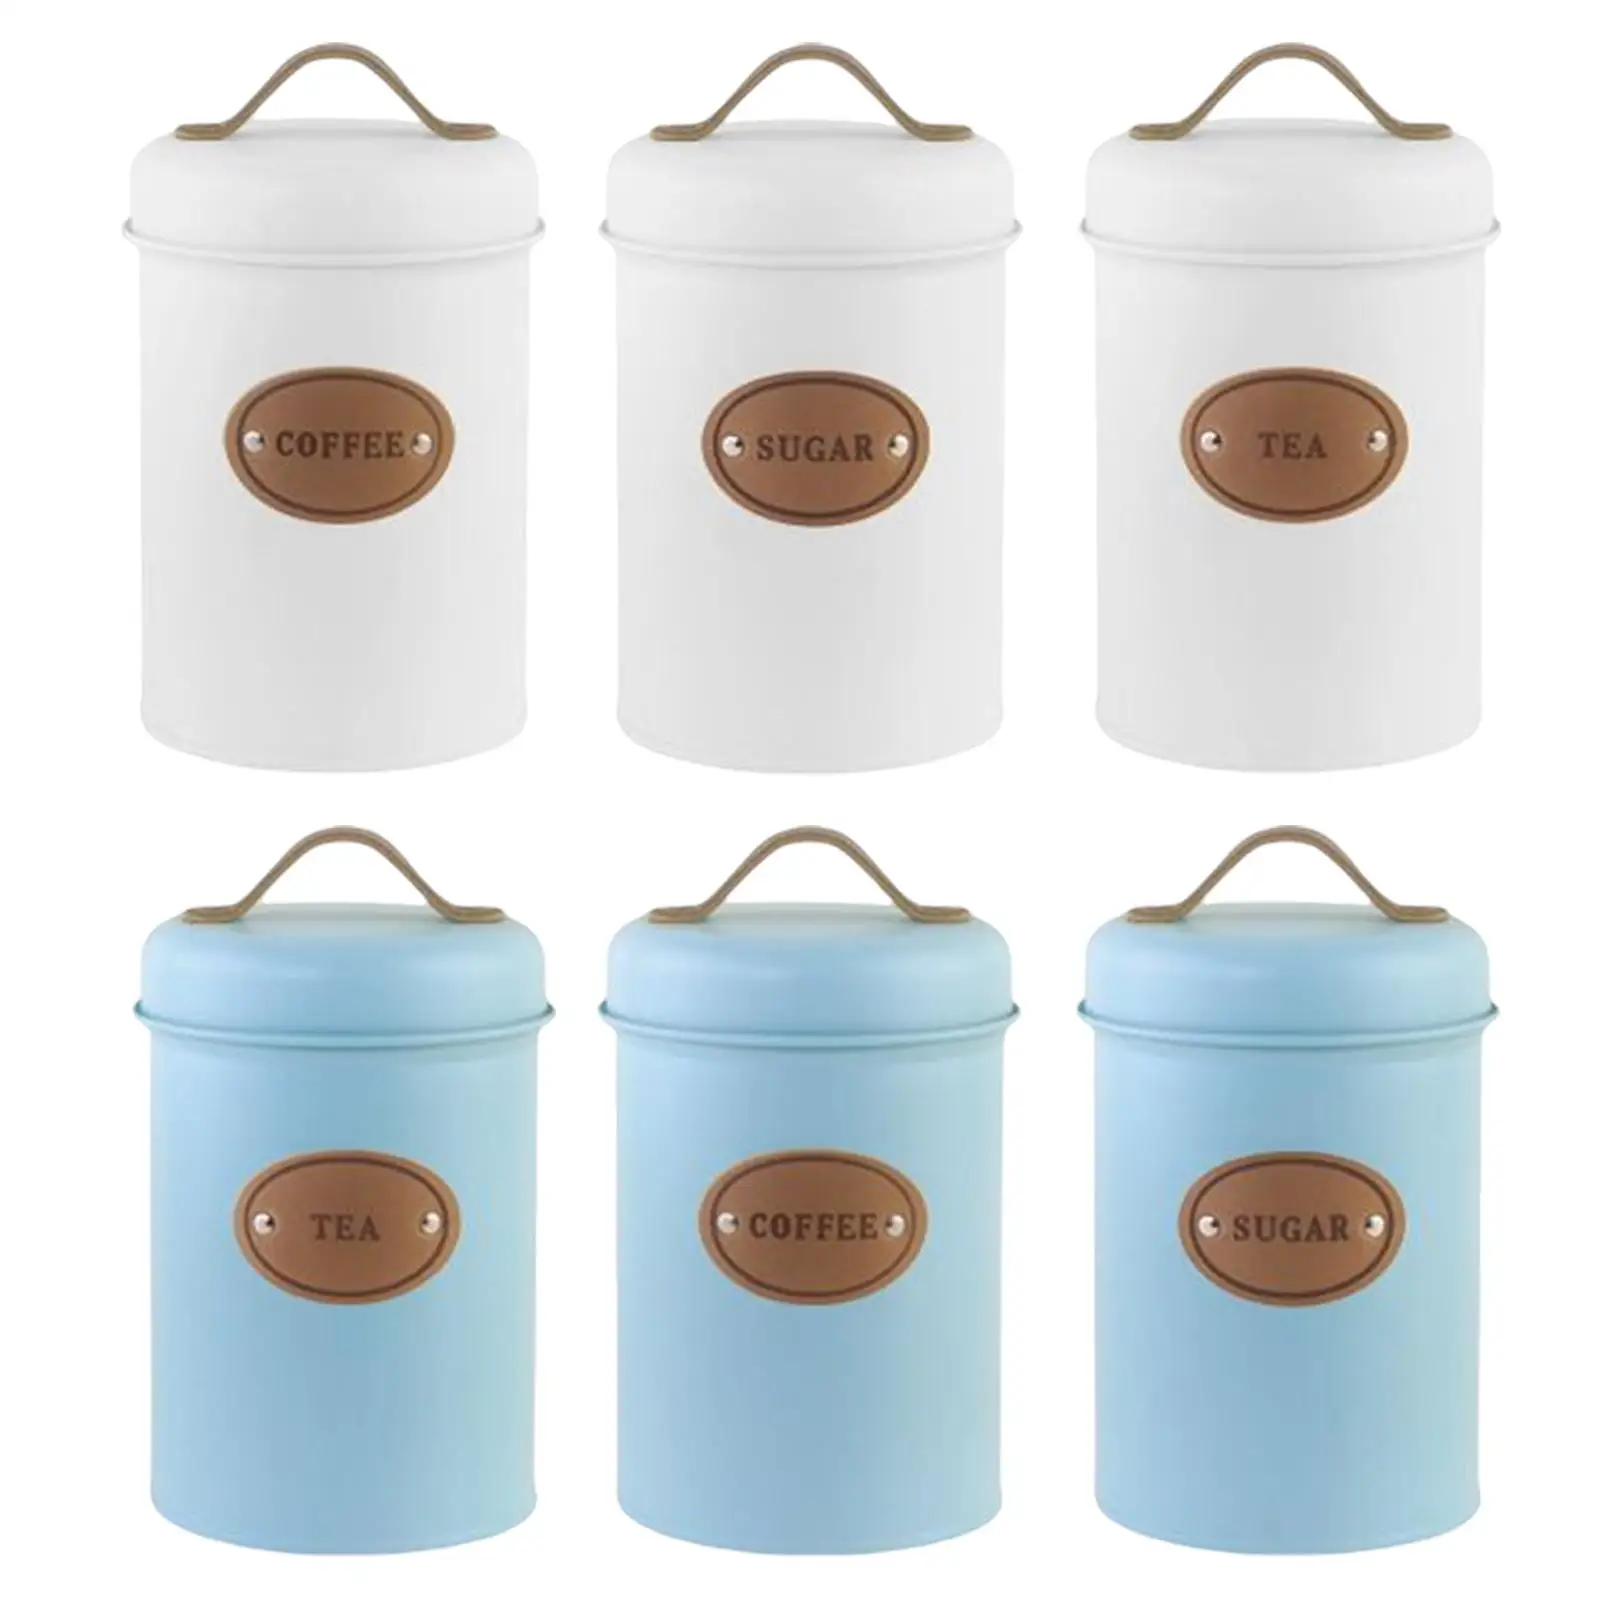 Storage Canisters with Sealing Cover Galvanized Iron Space Saving Kitchen Storage Canister Spice Jars for Sitting Room Kitchen